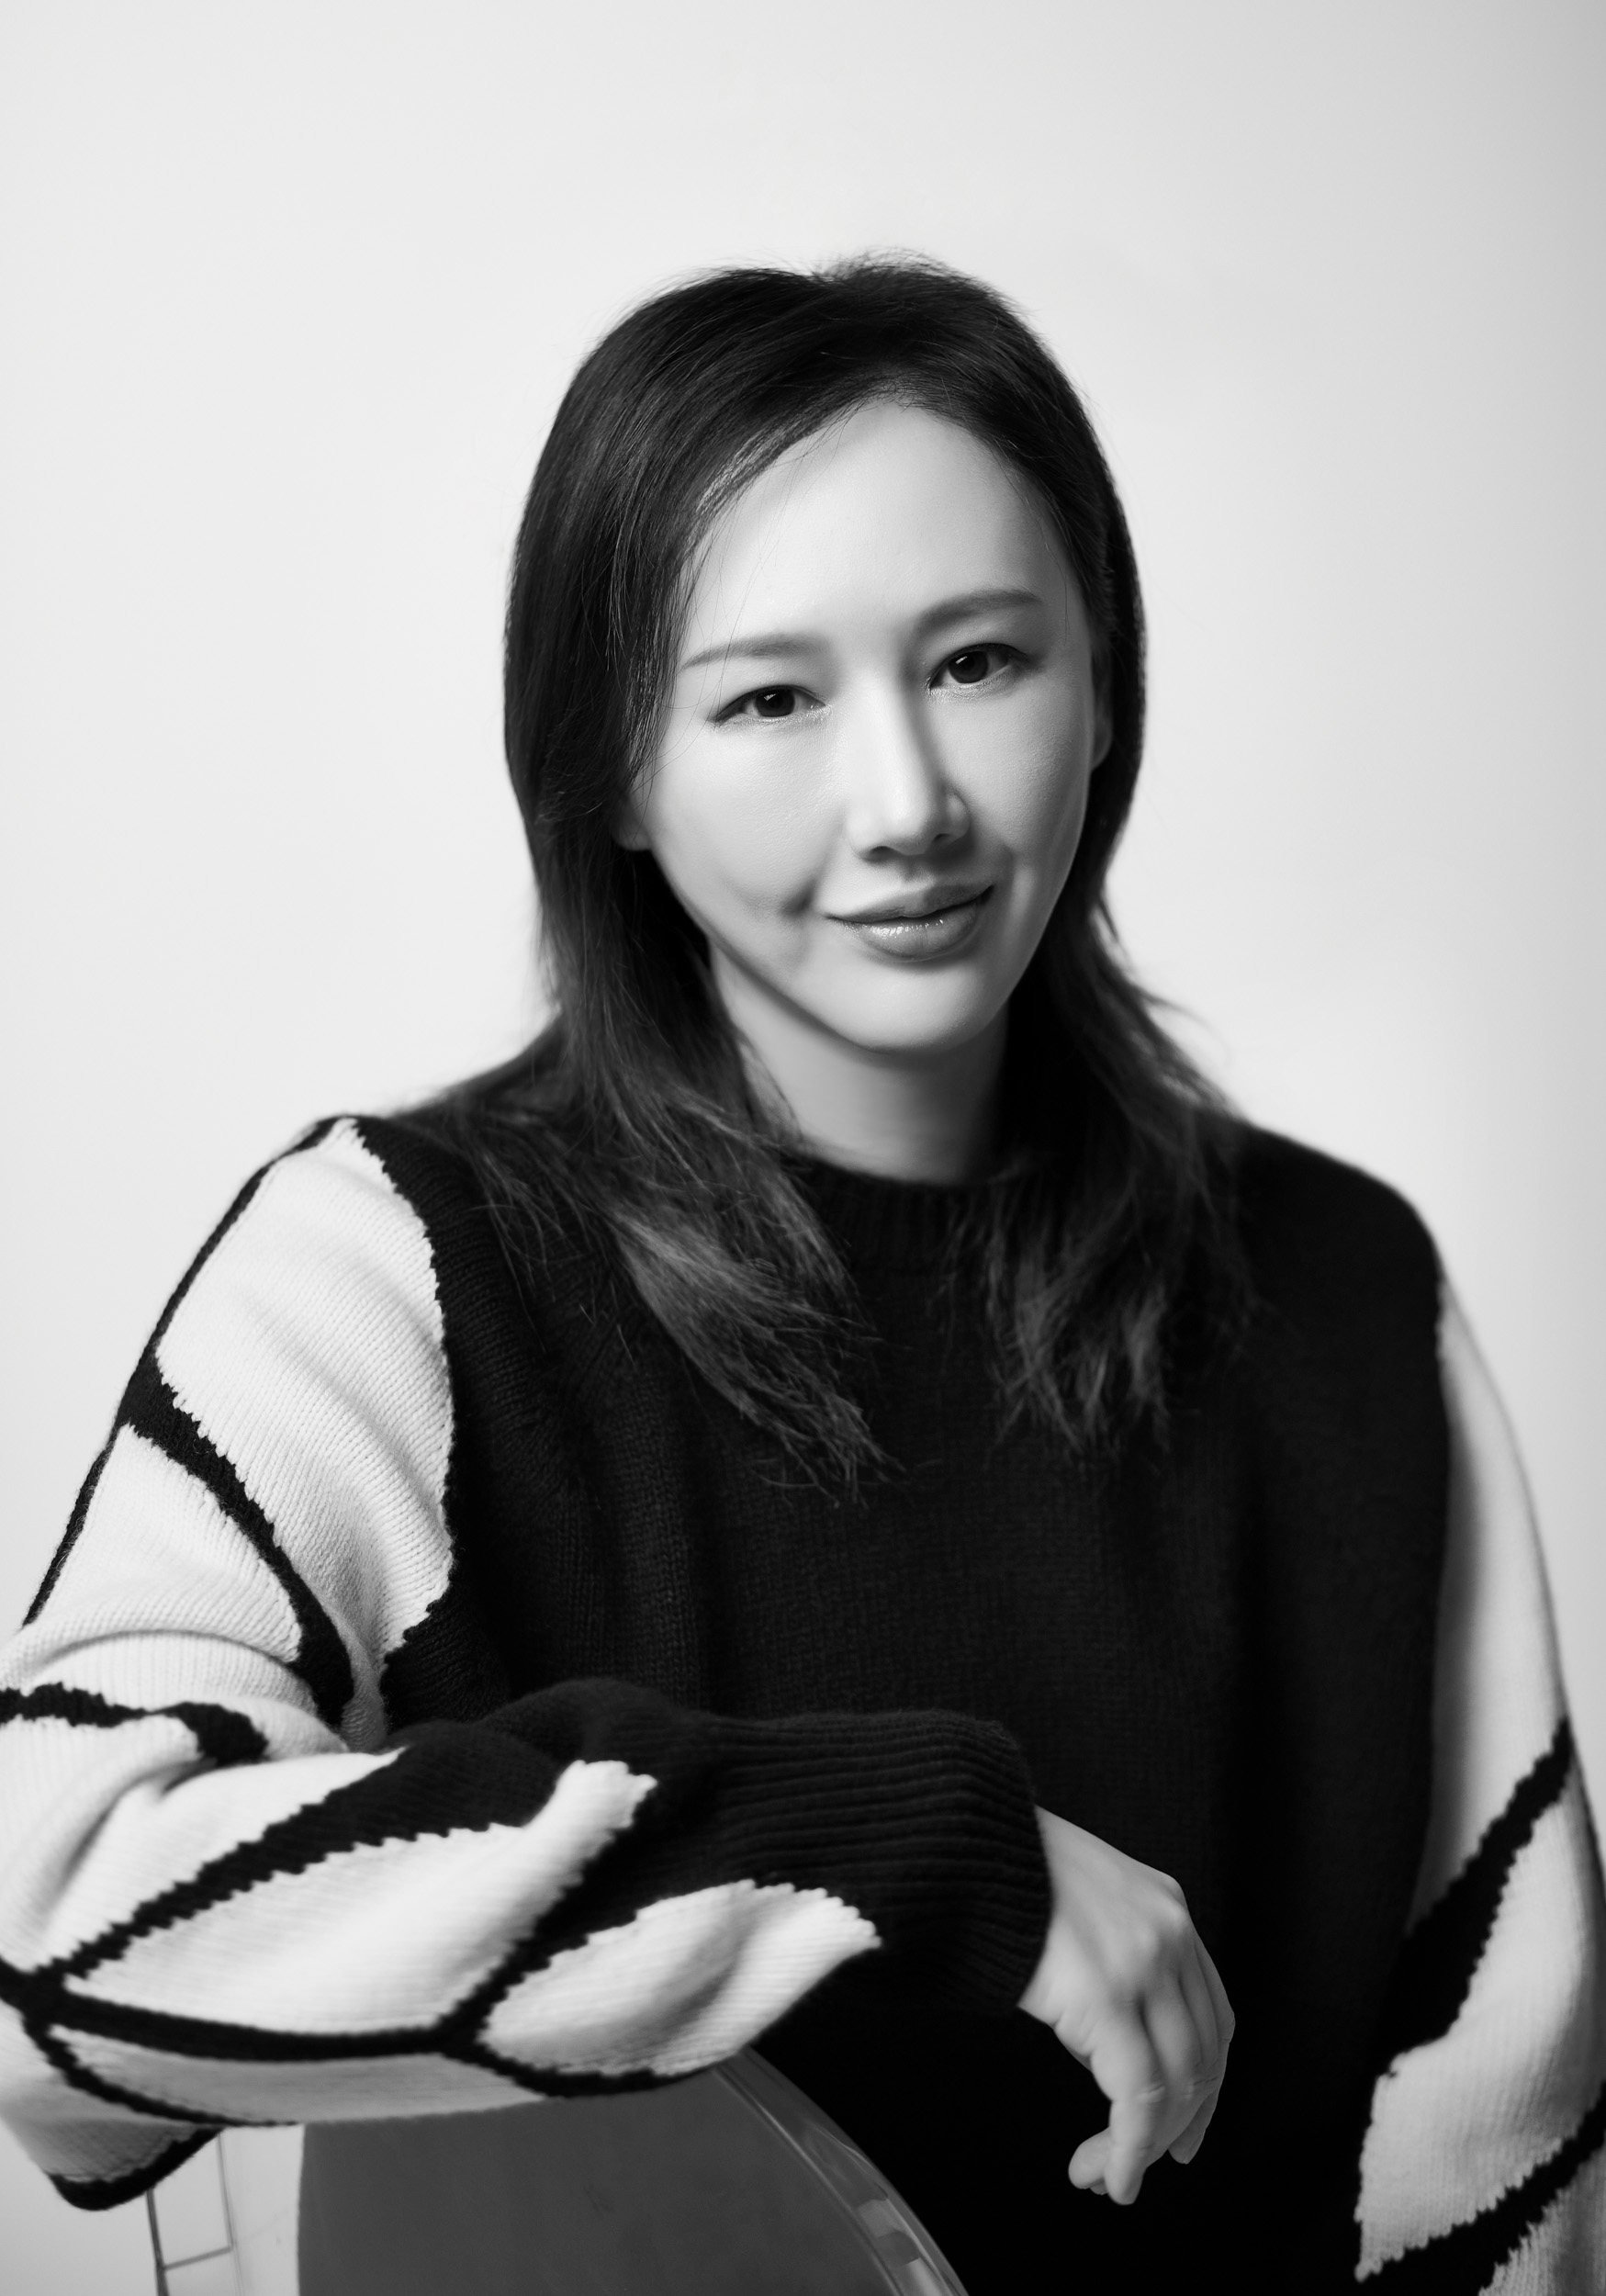 MCM's Tina Lutz and Katie Chung on rebranding and heritage: the  Korean-German fashion brand known for its logo-printed backpacks is  undergoing a revamp aimed at young 'digital nomads' – interview